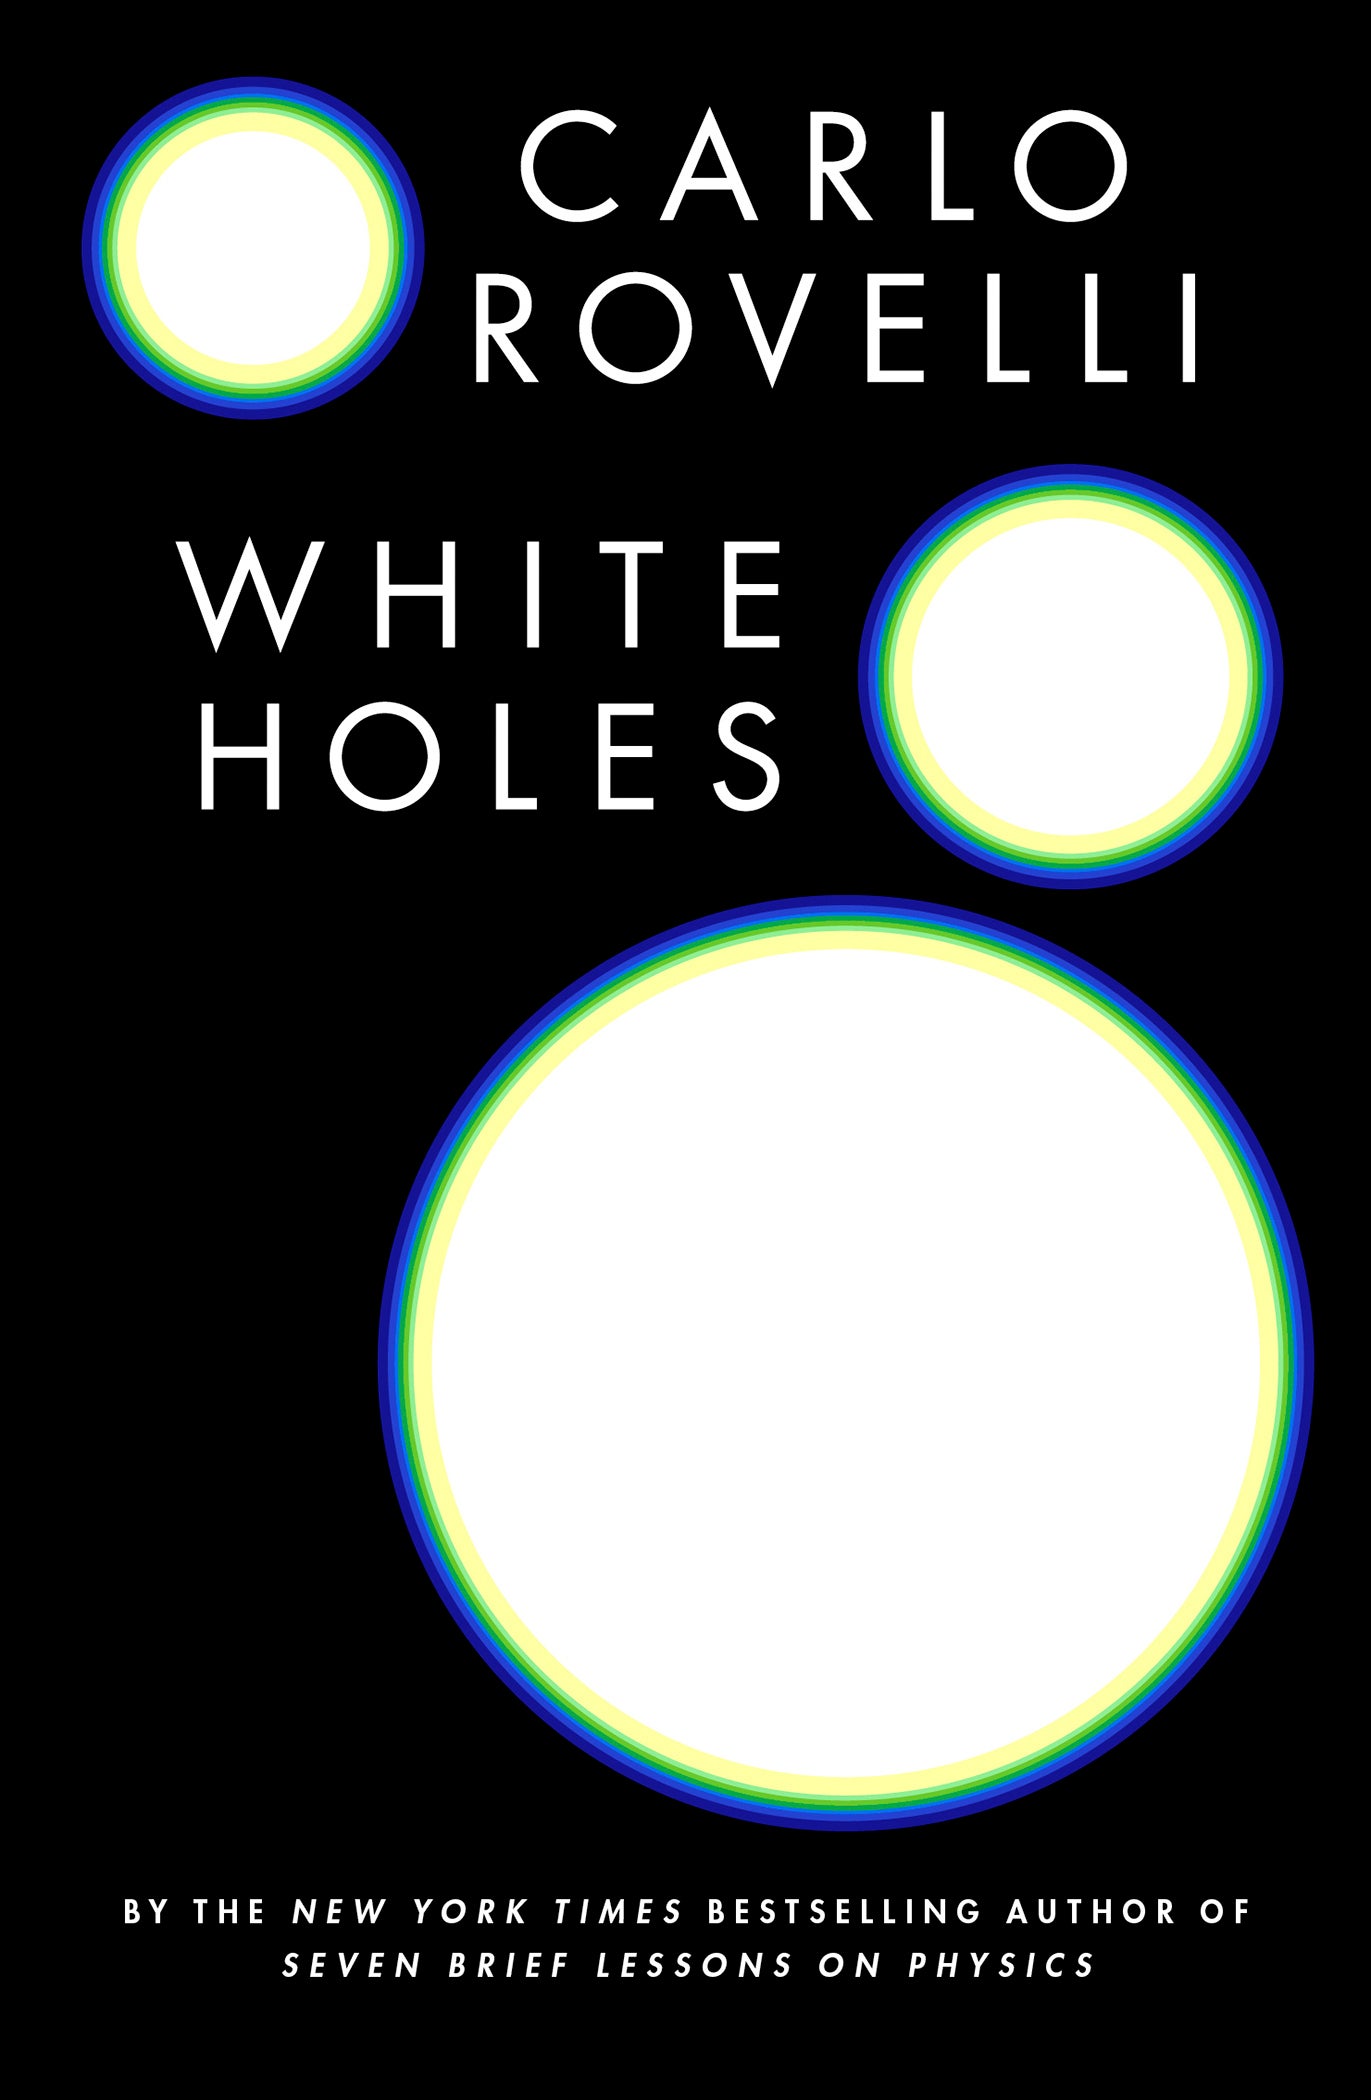 Book Review - White Holes